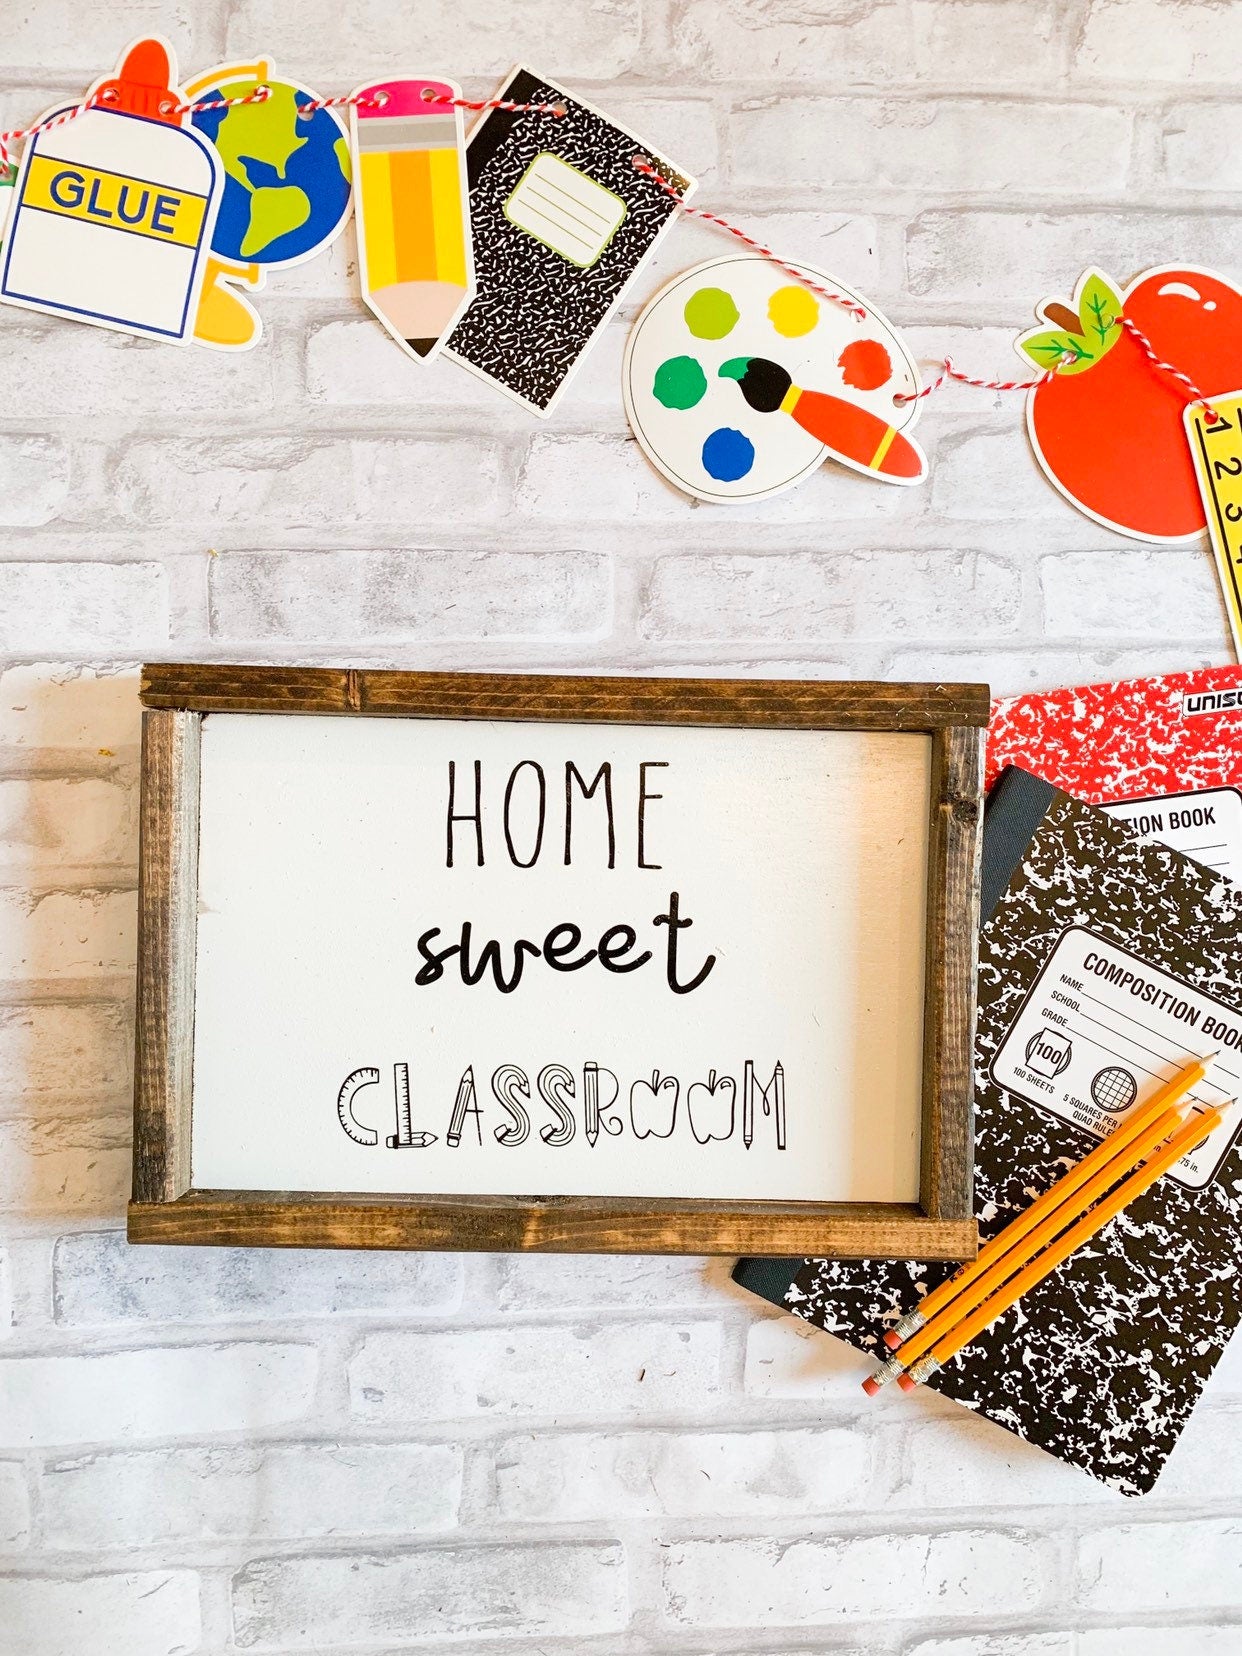 Home Sweet Classroom sign